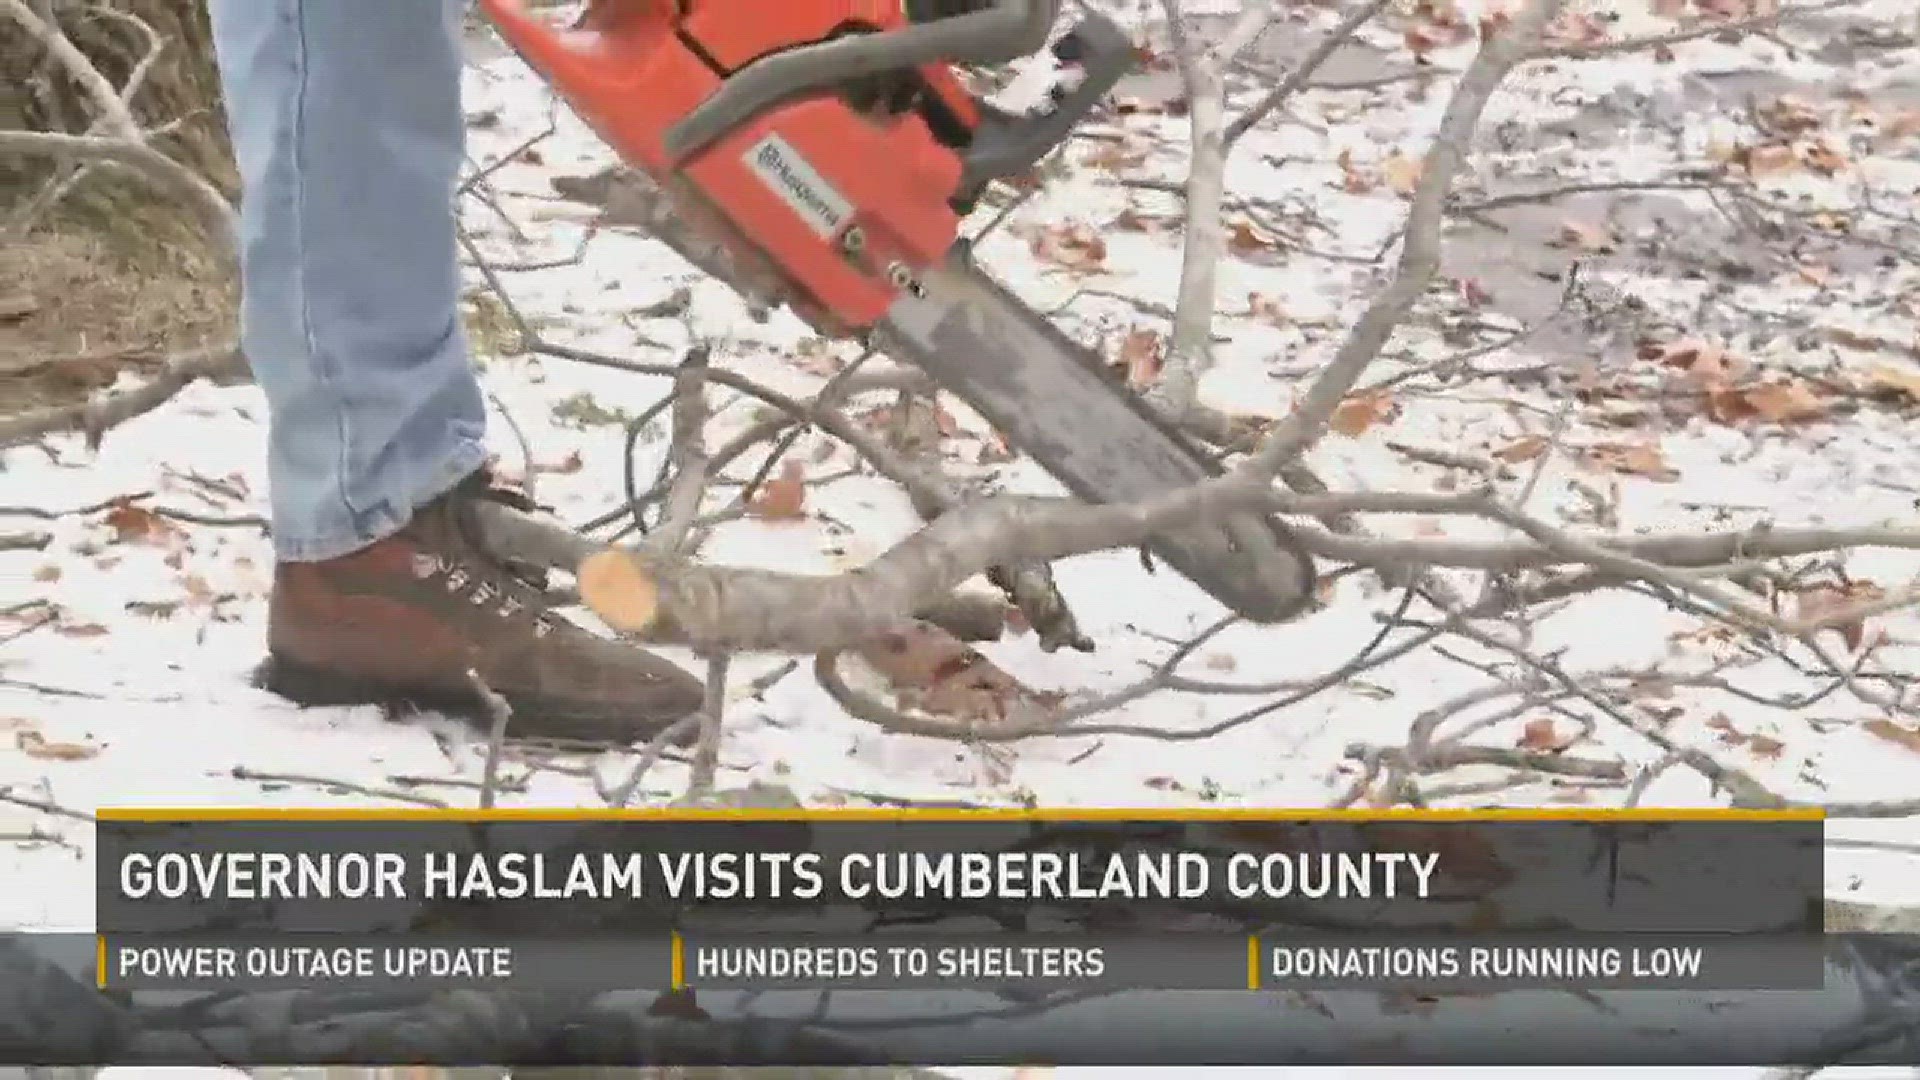 Cumberland County residents do their best to come together in cleaning up their community devastated by winter weather.